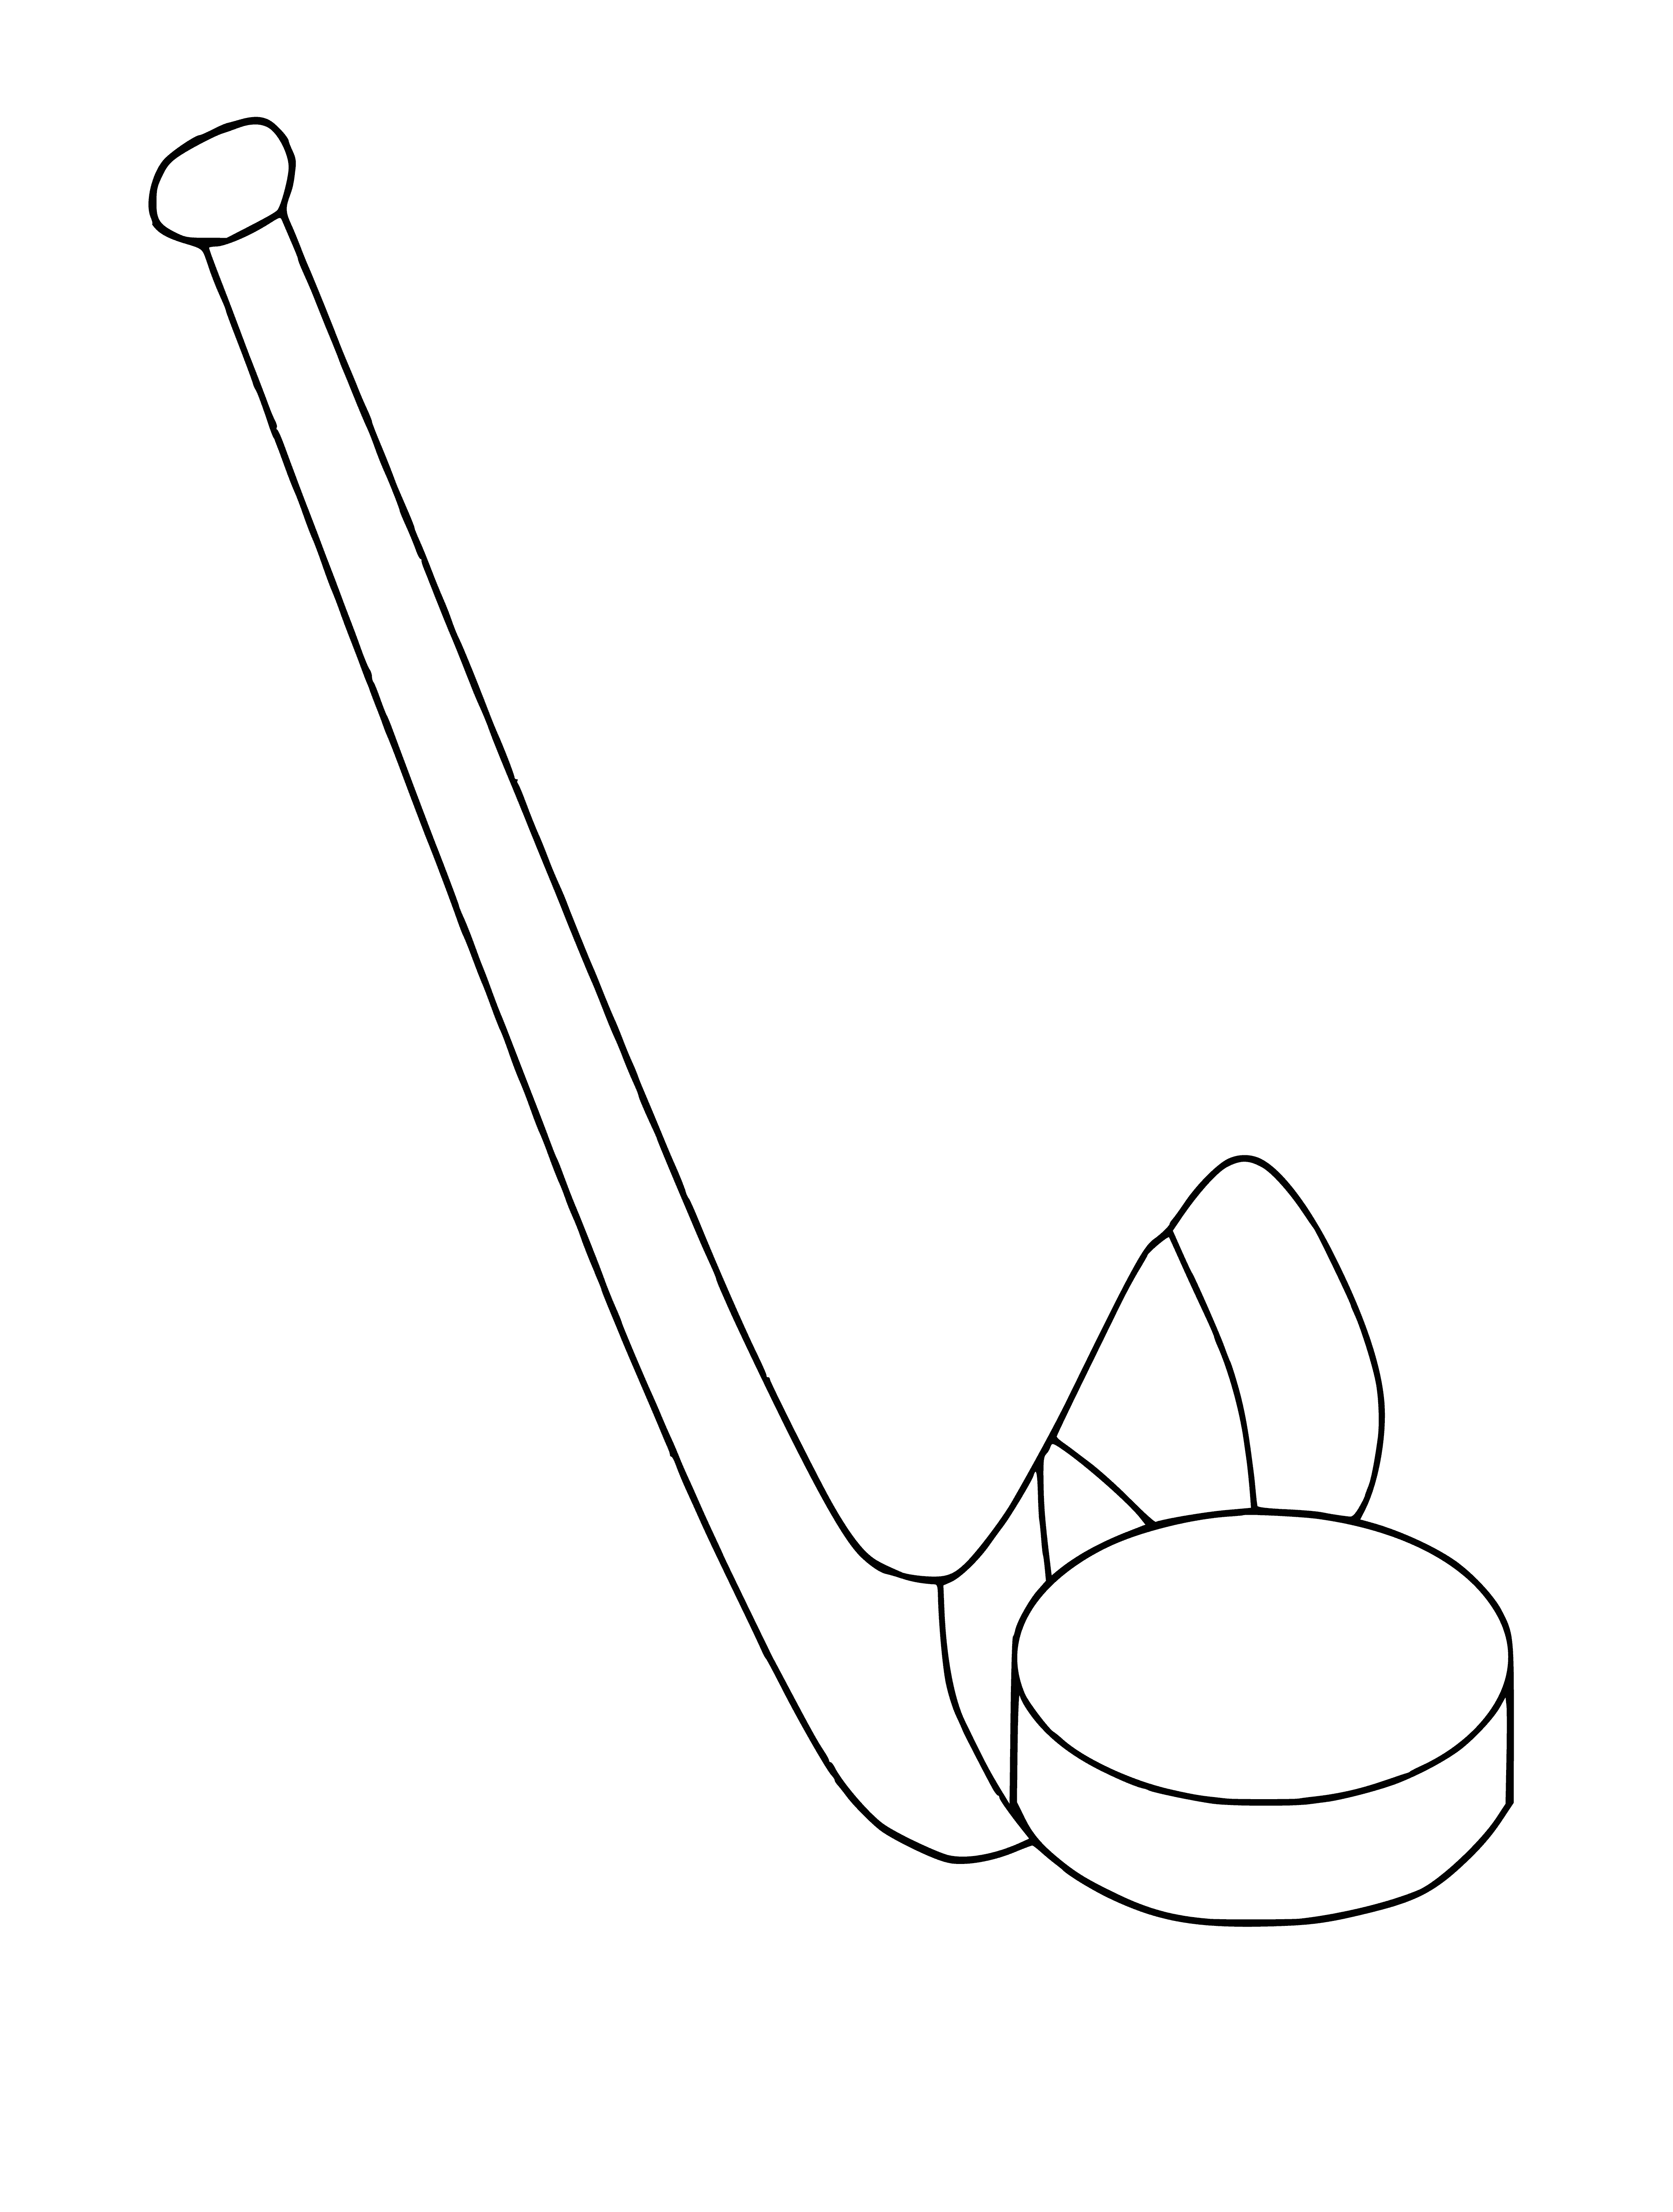 Hockey stick and puck coloring page